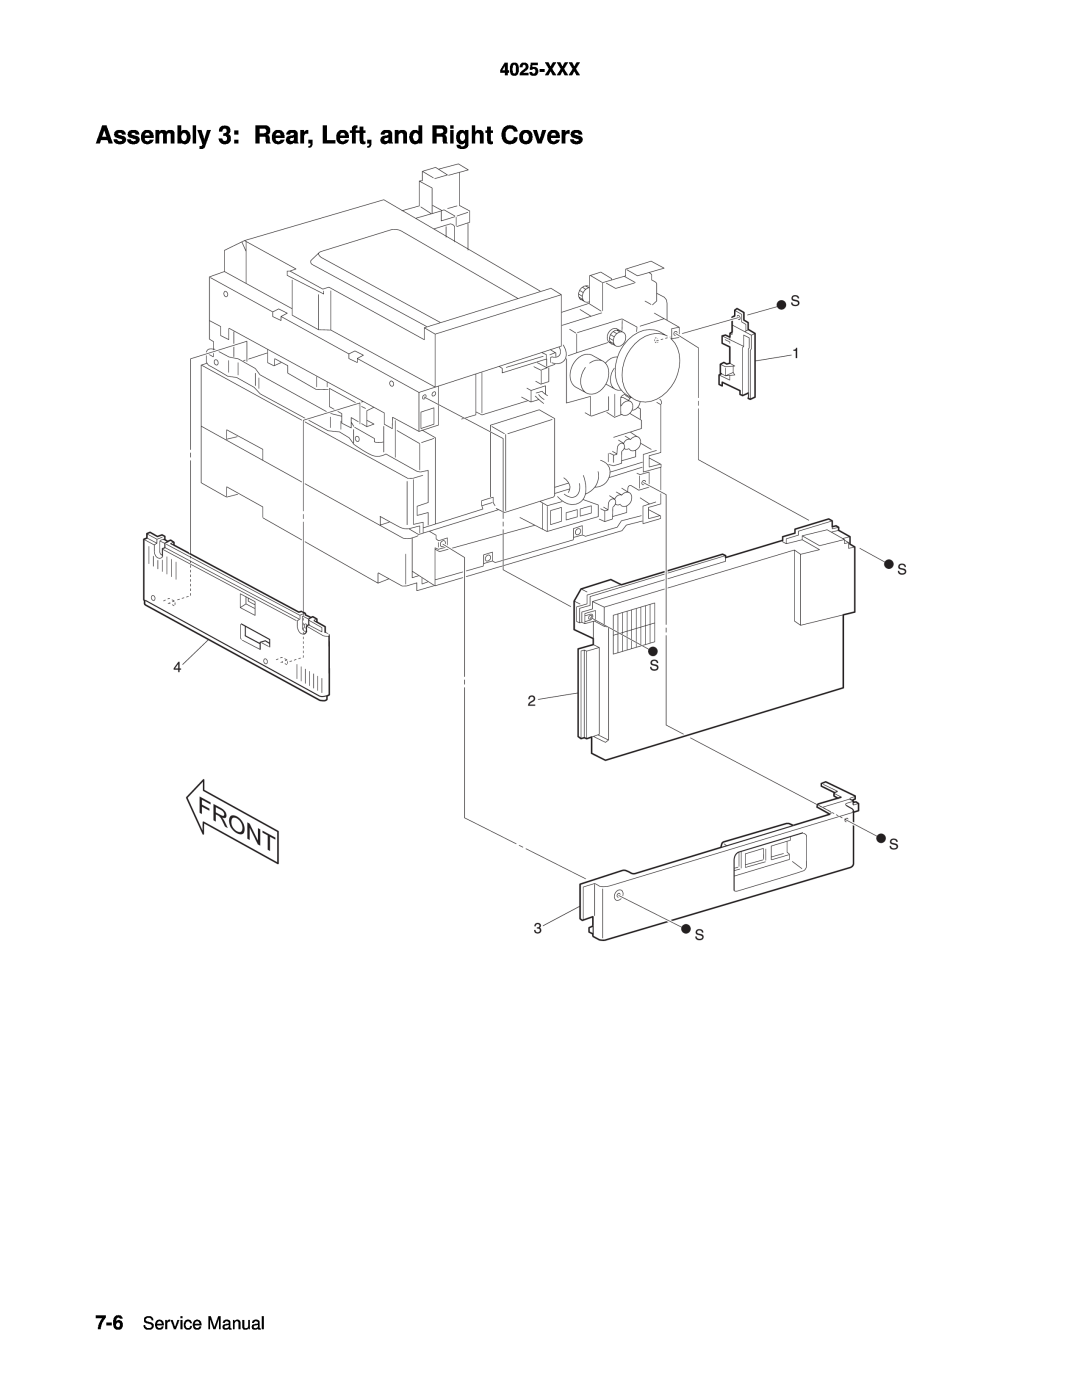 Lexmark W820 service manual Assembly 3: Rear, Left, and Right Covers, 4025-XXX 